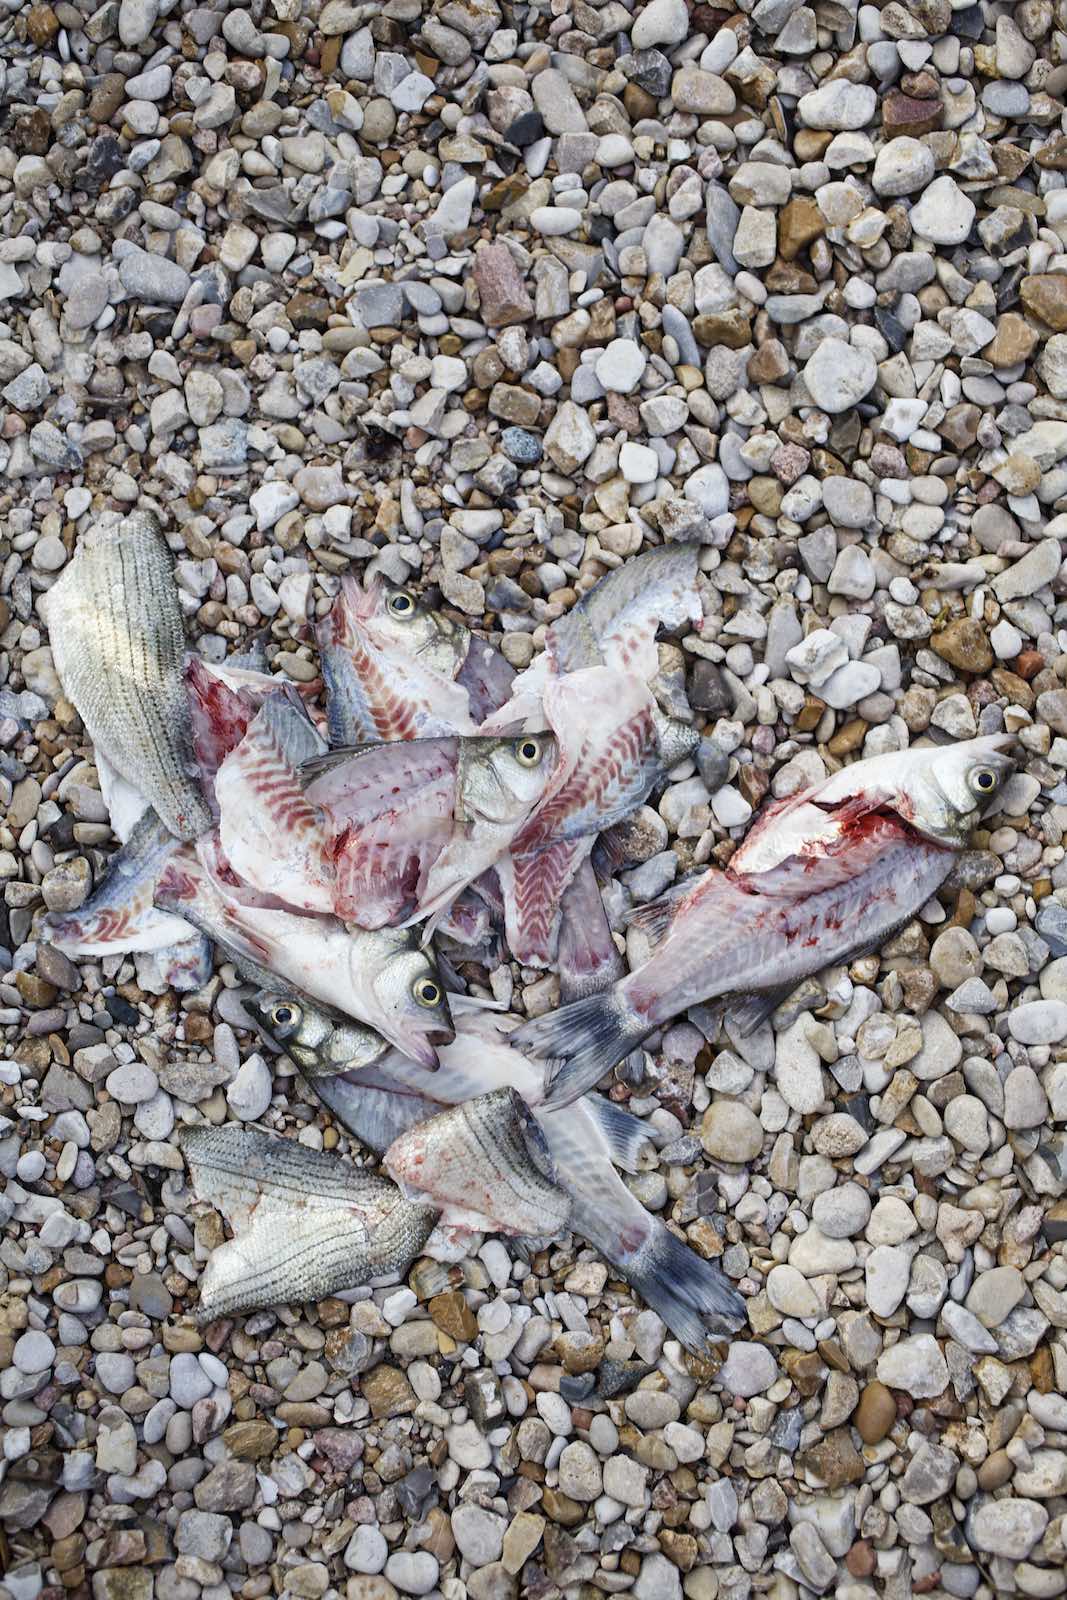 Jody Horton Photography - Fish skins and heads discarded among river rocks. 